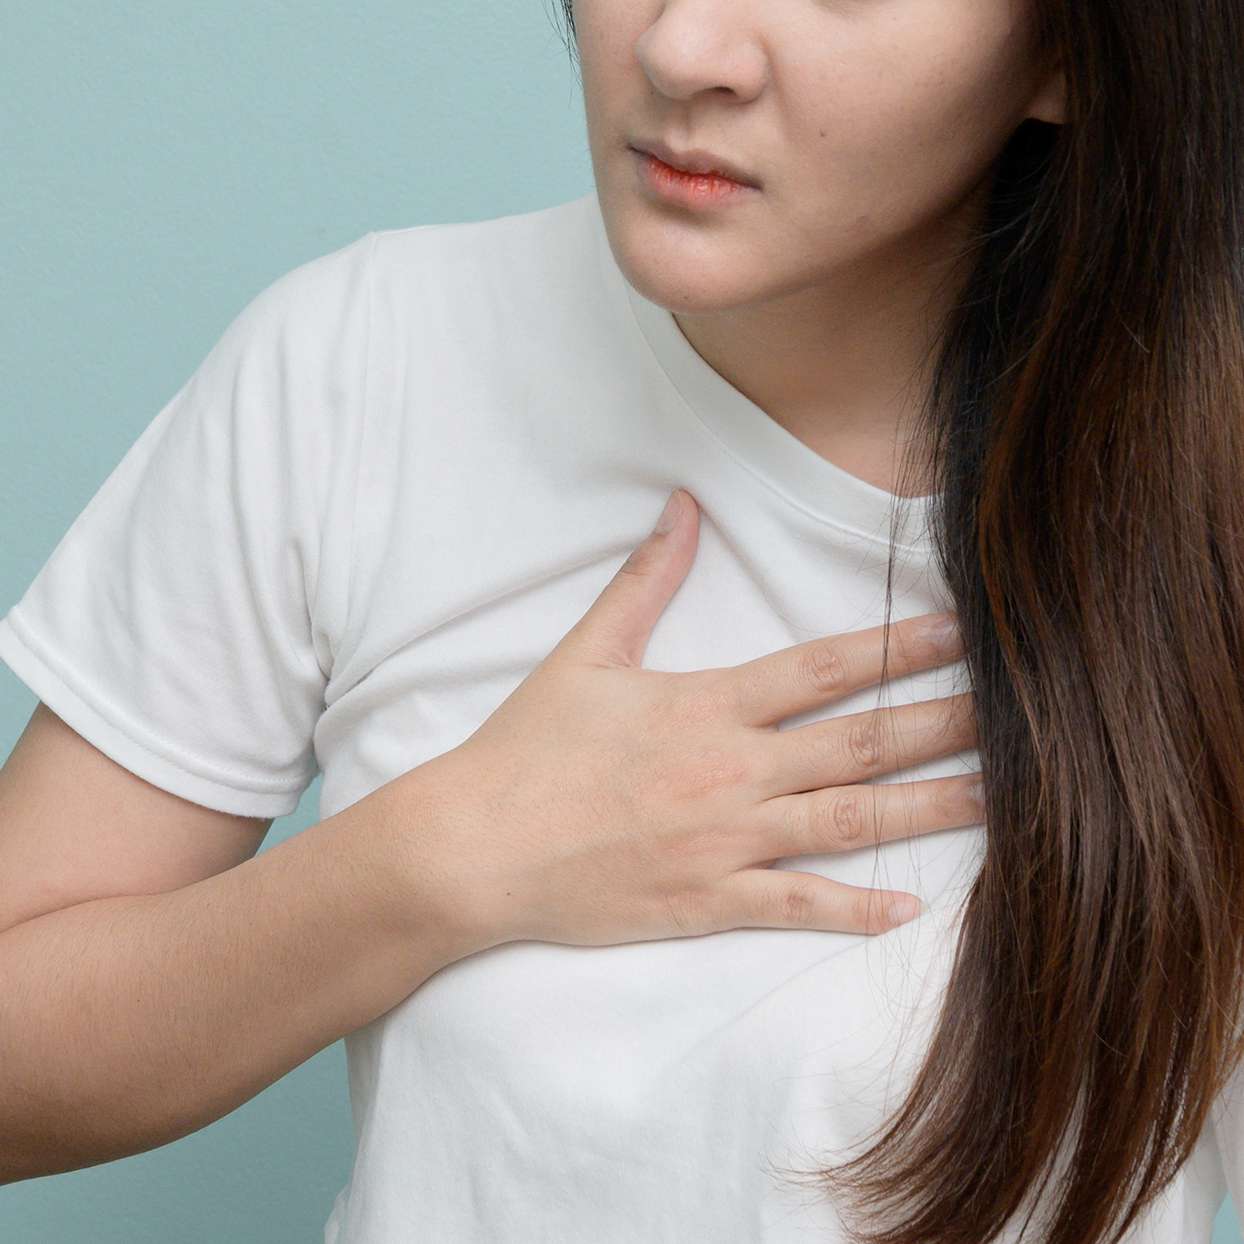 woman holding her chest indicating pain or chest tightness